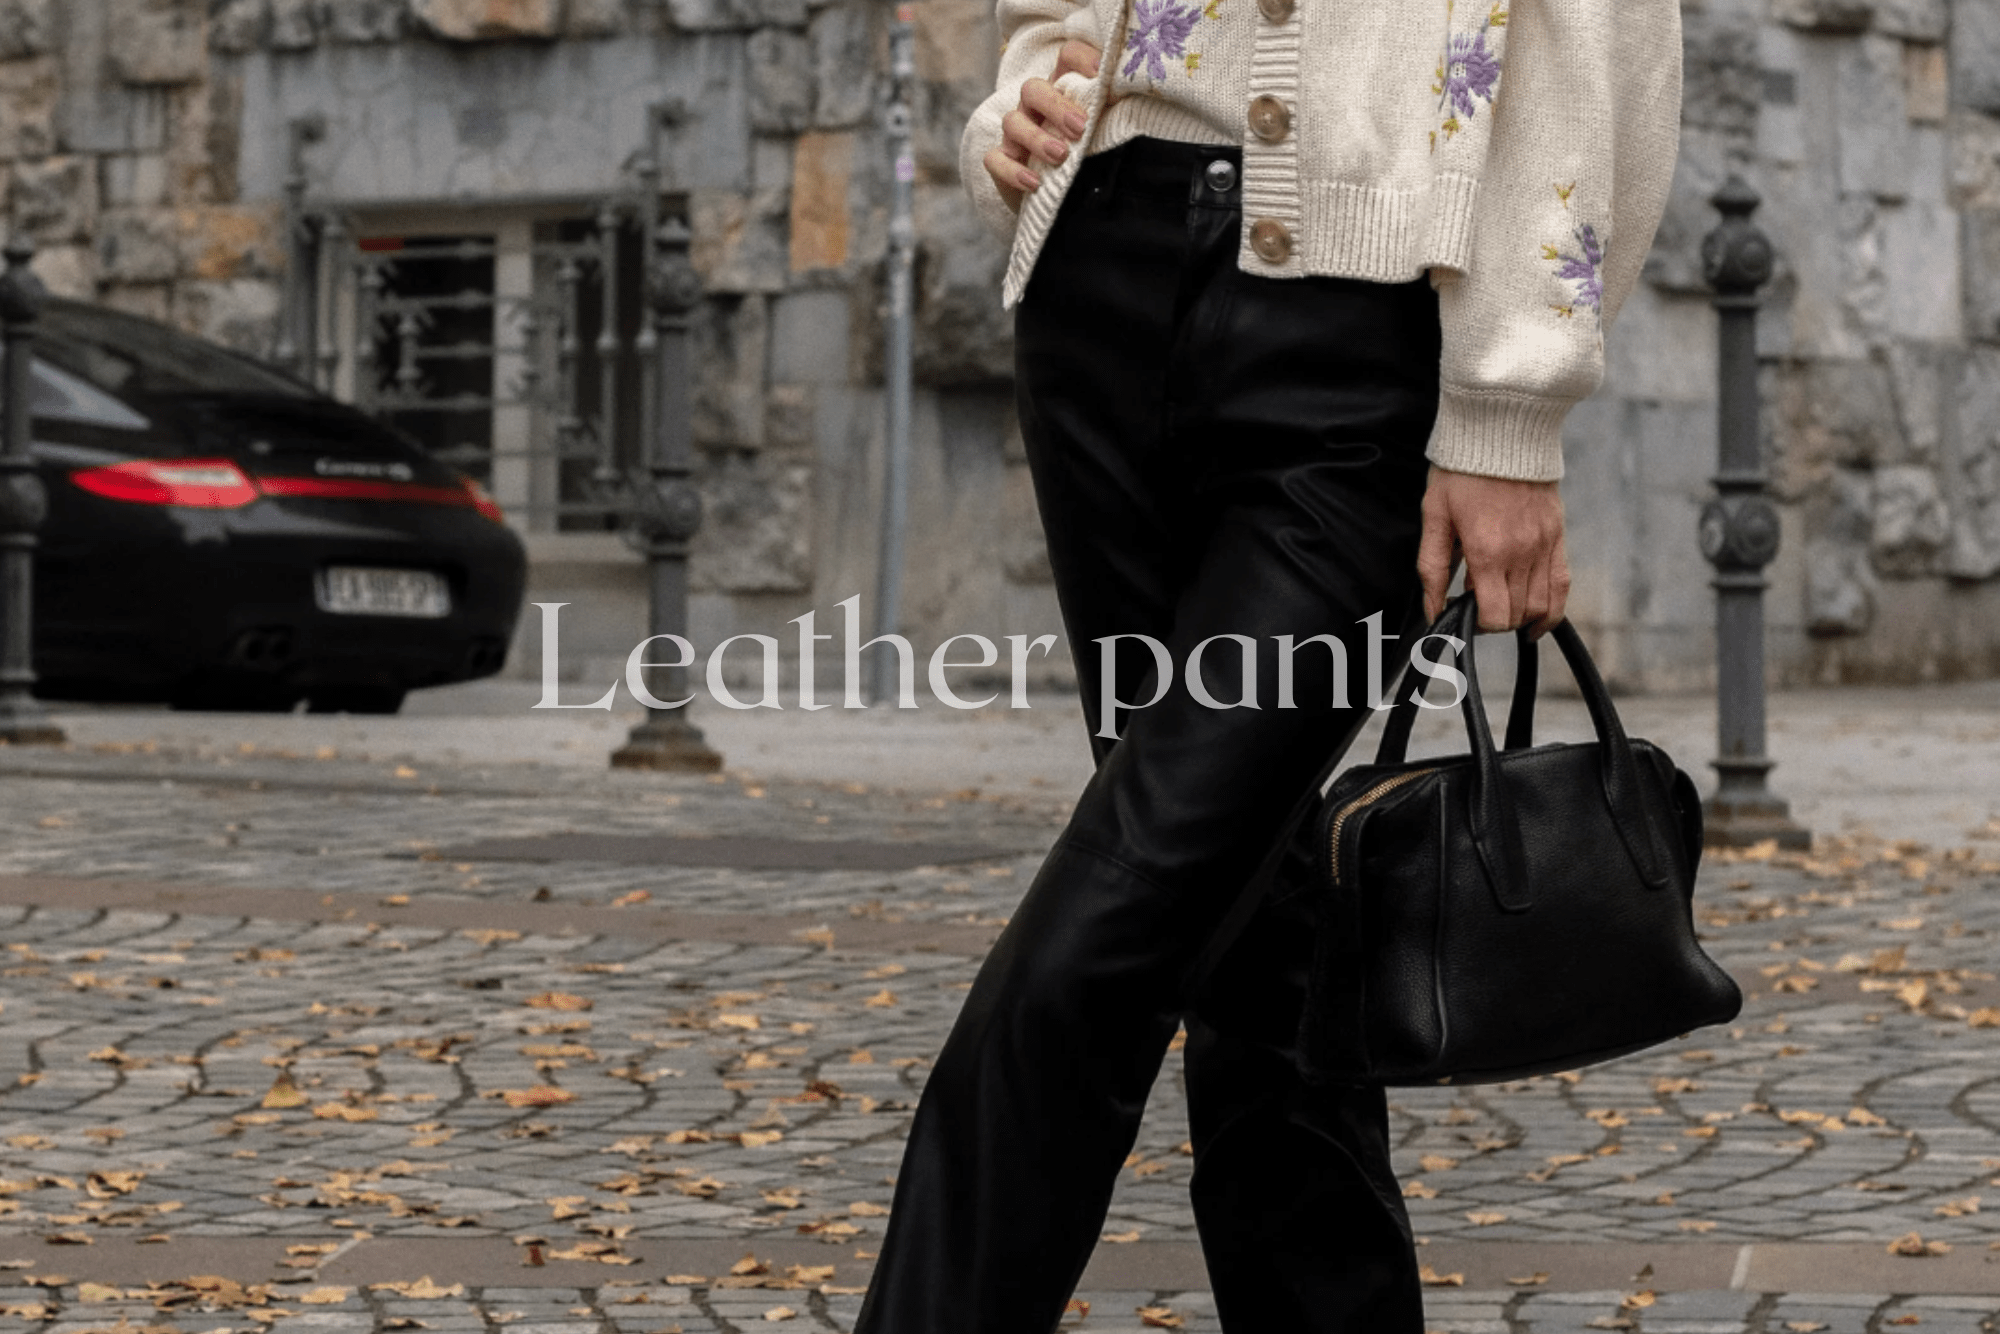 Leather pants: The most statement pants are back